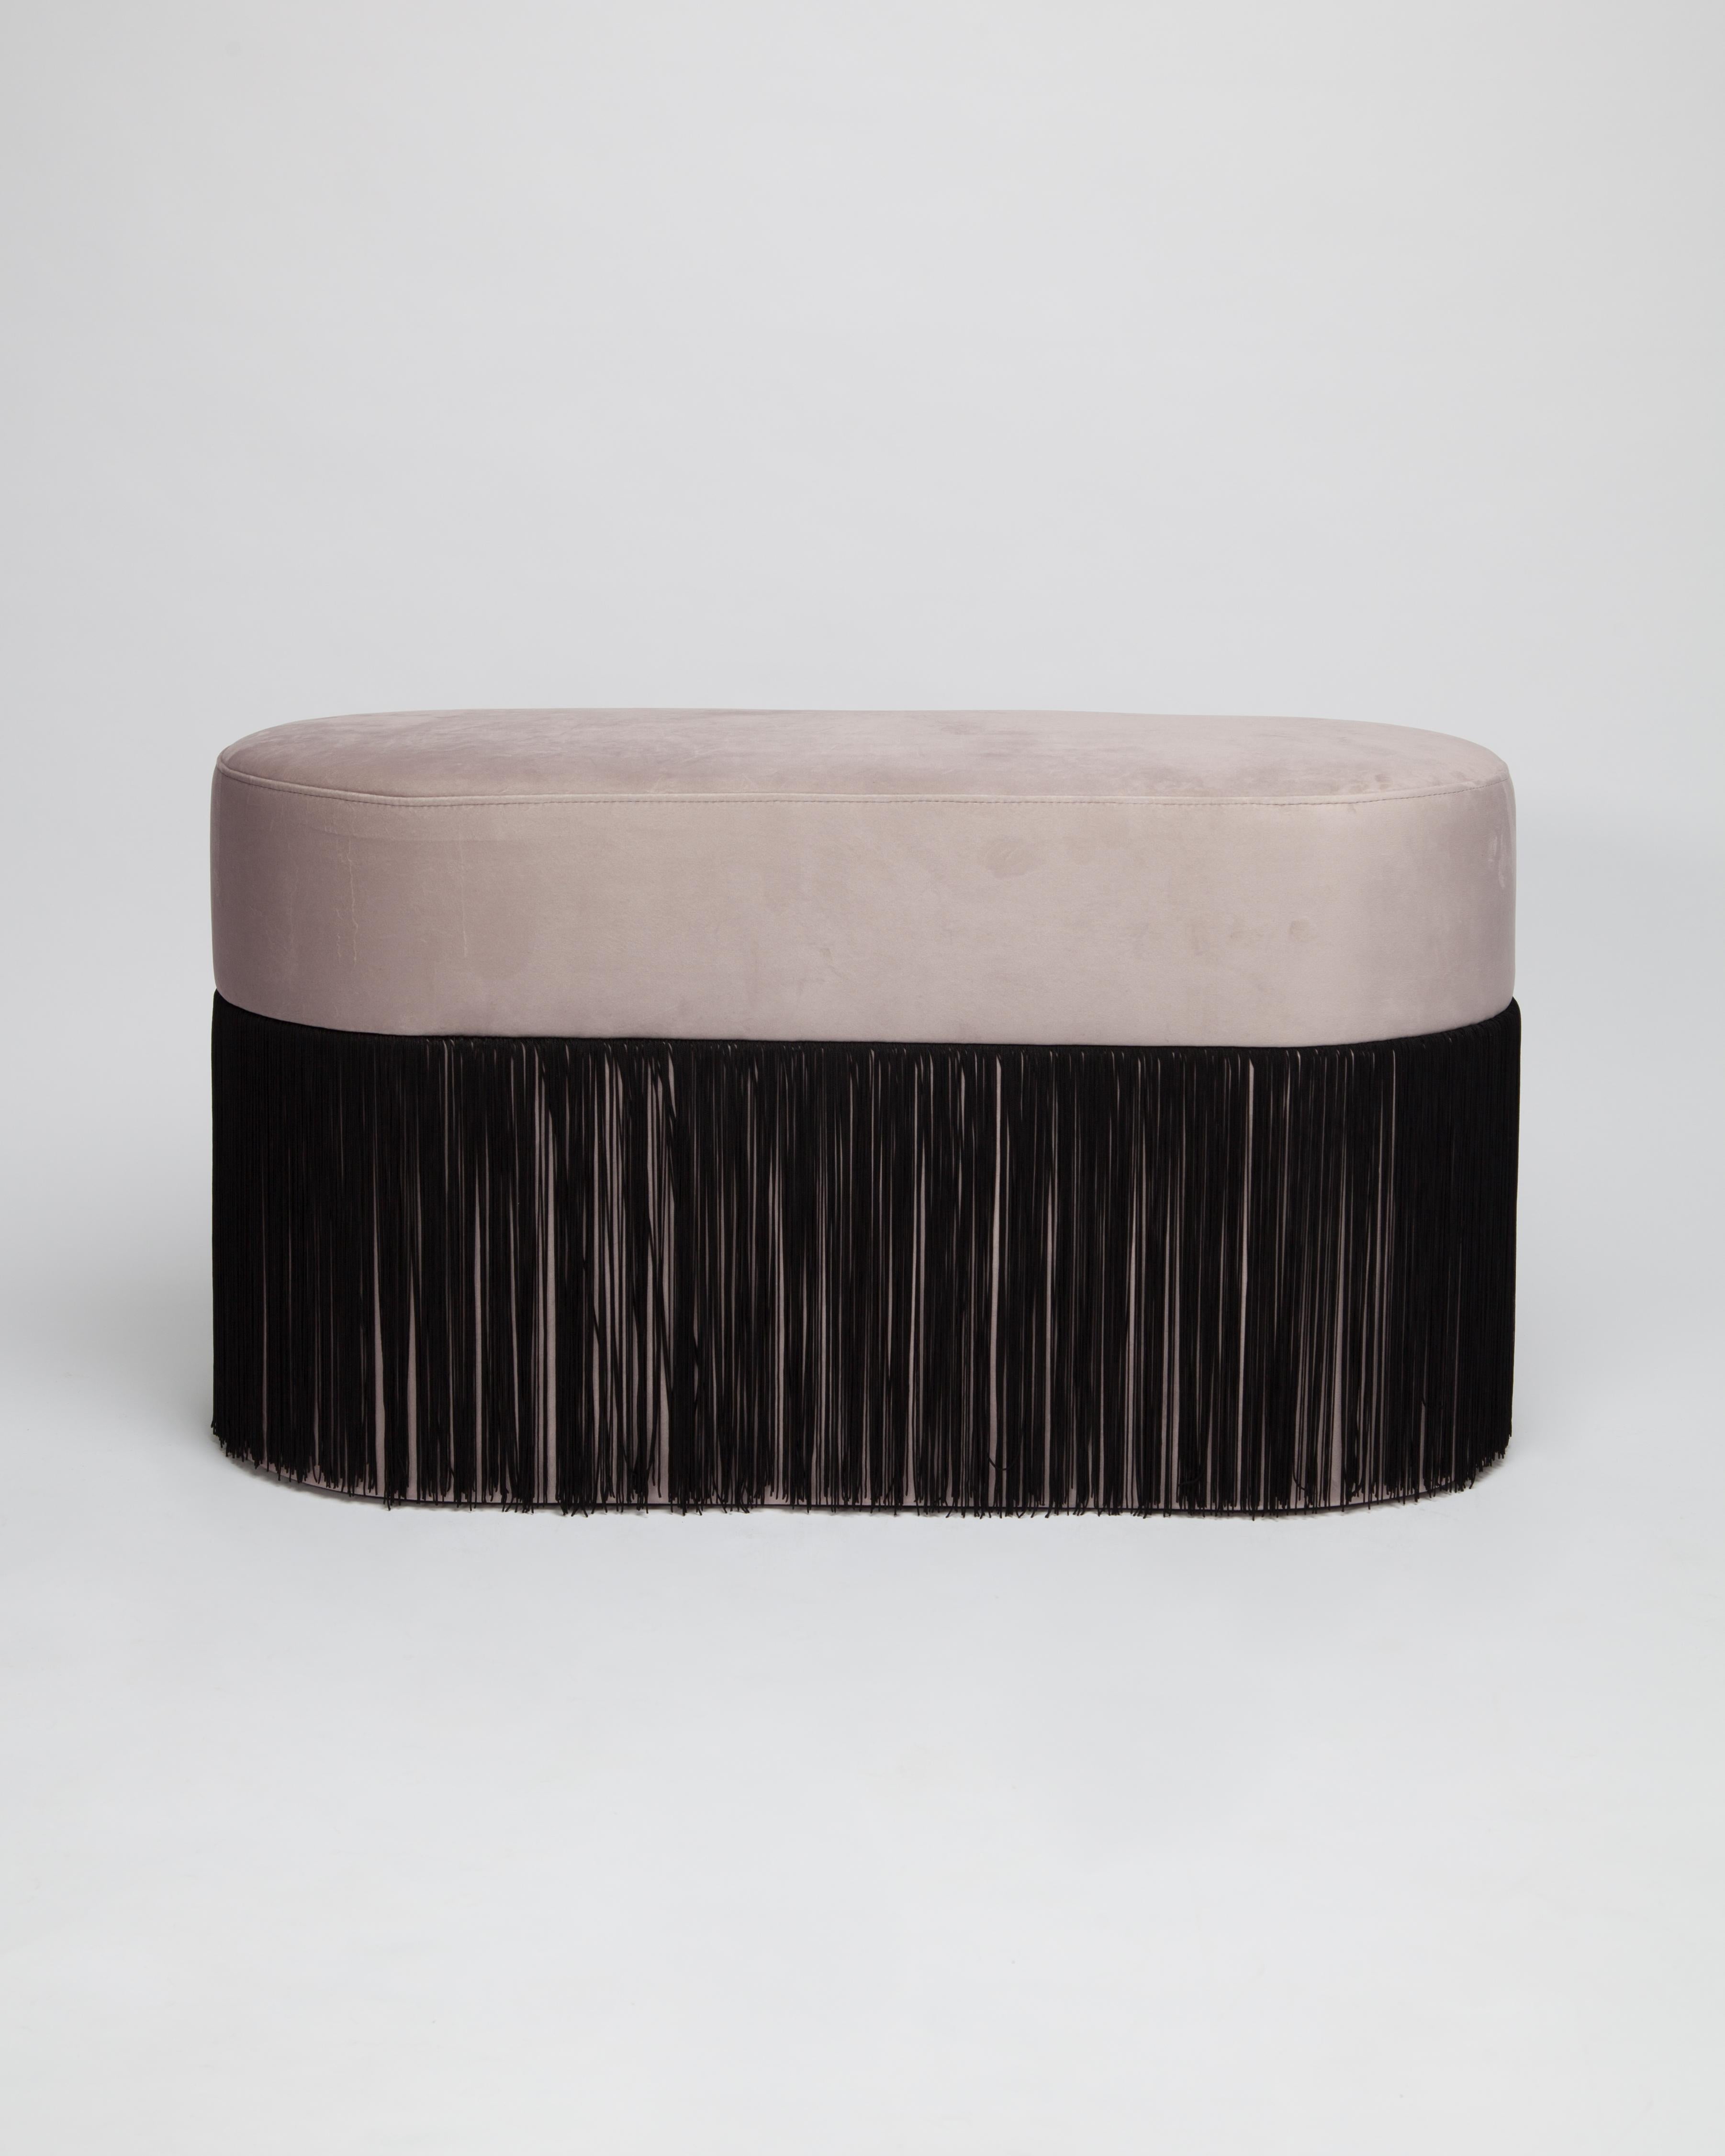 Pouf pill L by Houtique
Dimensions: H 45 x 80 x 35 cm
Materials: Velvet upholstery and 30cm fringes

Pill Pouf L
Art-deco style pouf with wood structure and velvet fabric.
2 fiber-board discs of 16mm, joined by wooden tufts.
Upholstery Velvet 100%